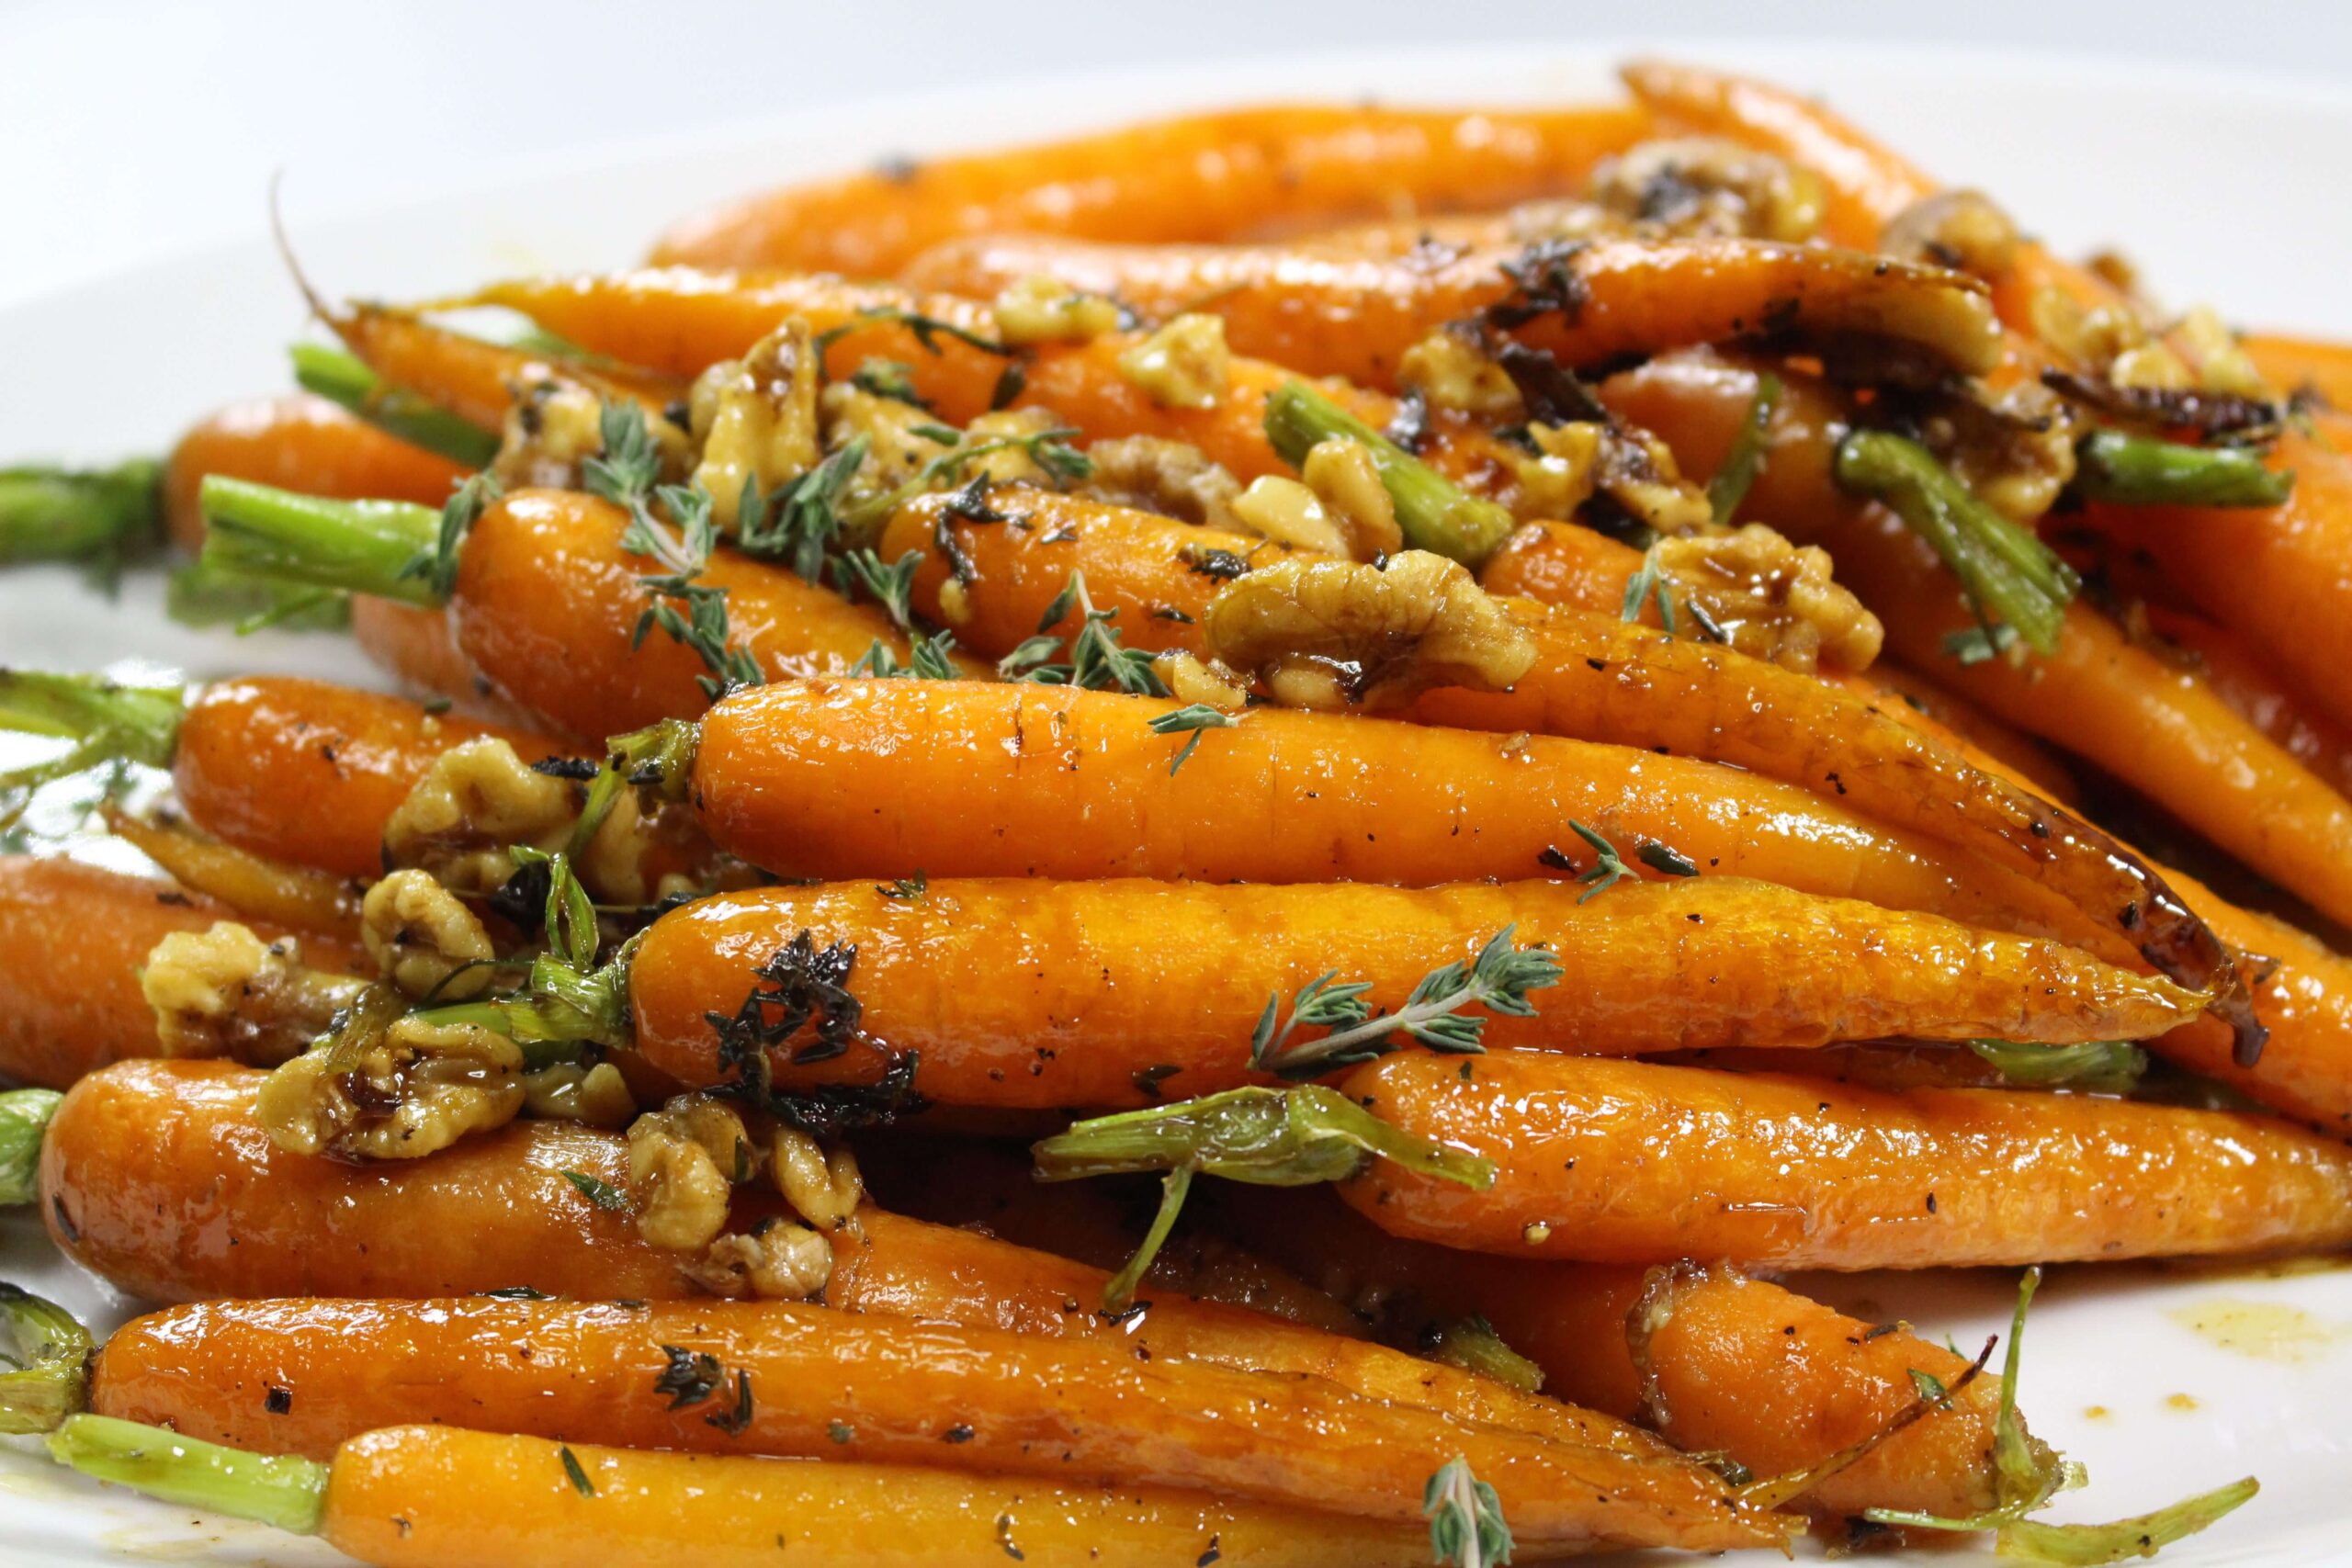 7.Maple Glazed Carrots with Pecans: